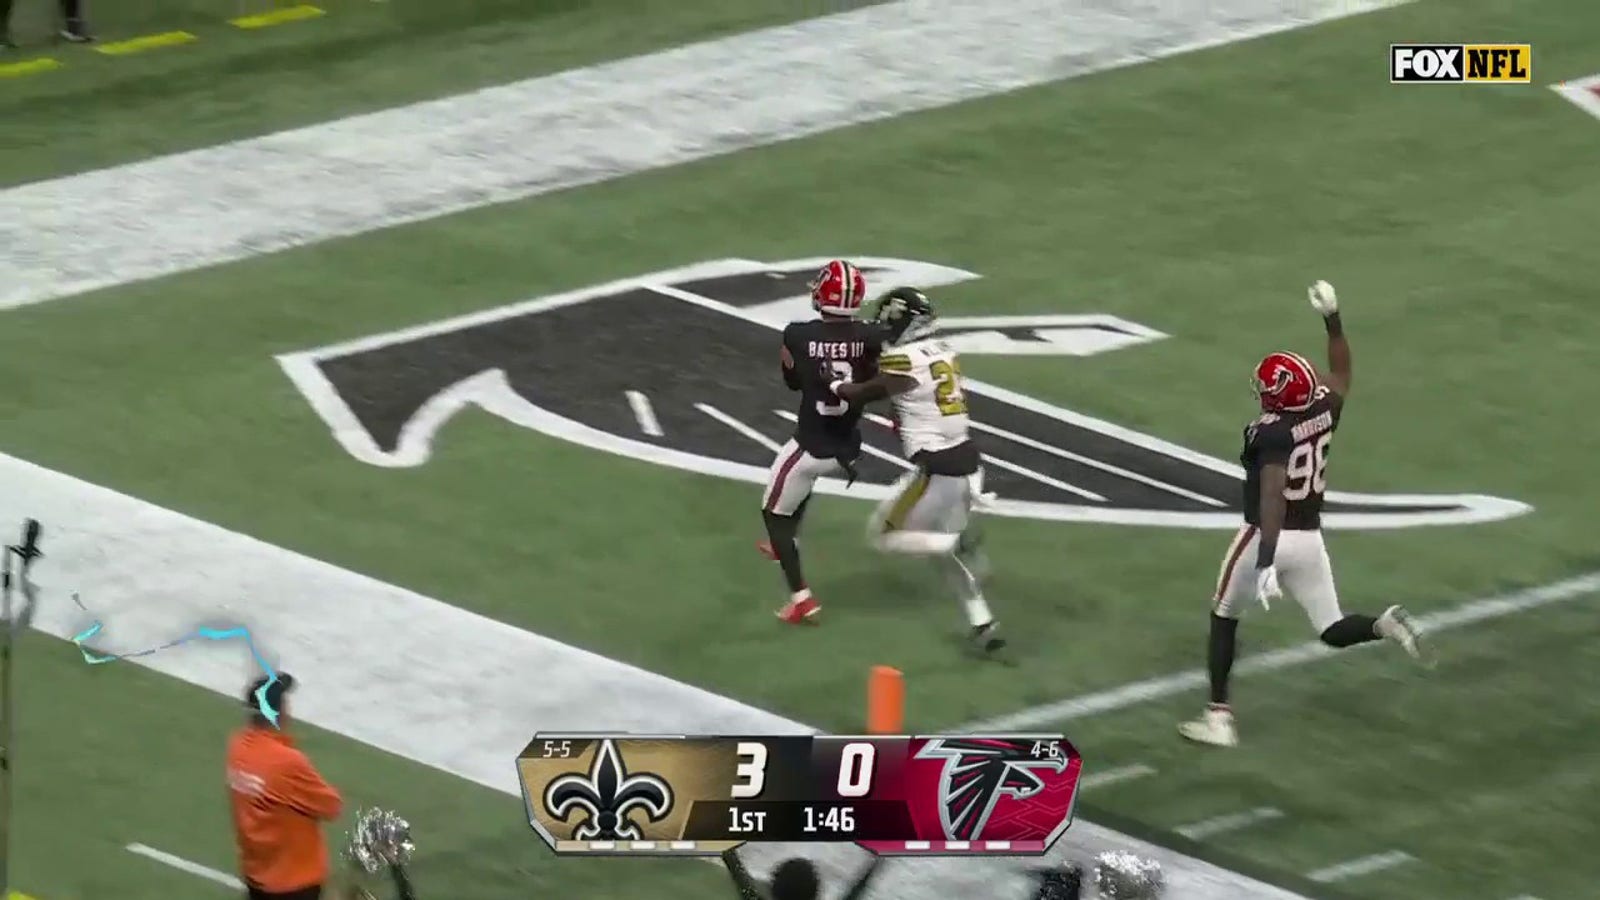 Jessie Bates snags a 92-yard pick-six to give Falcons lead over Saints